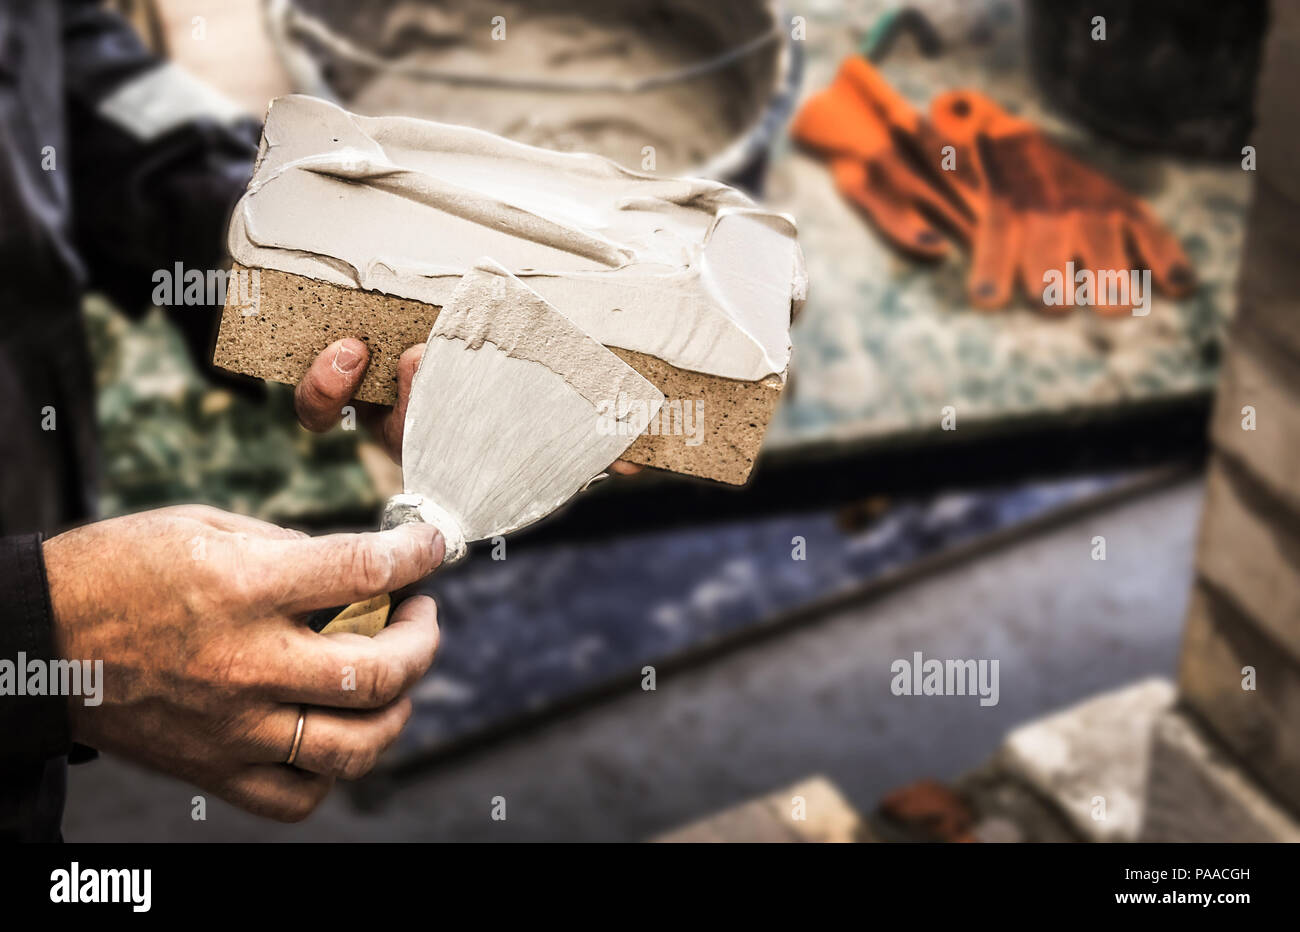 hands with a brick and building trowel Stock Photo